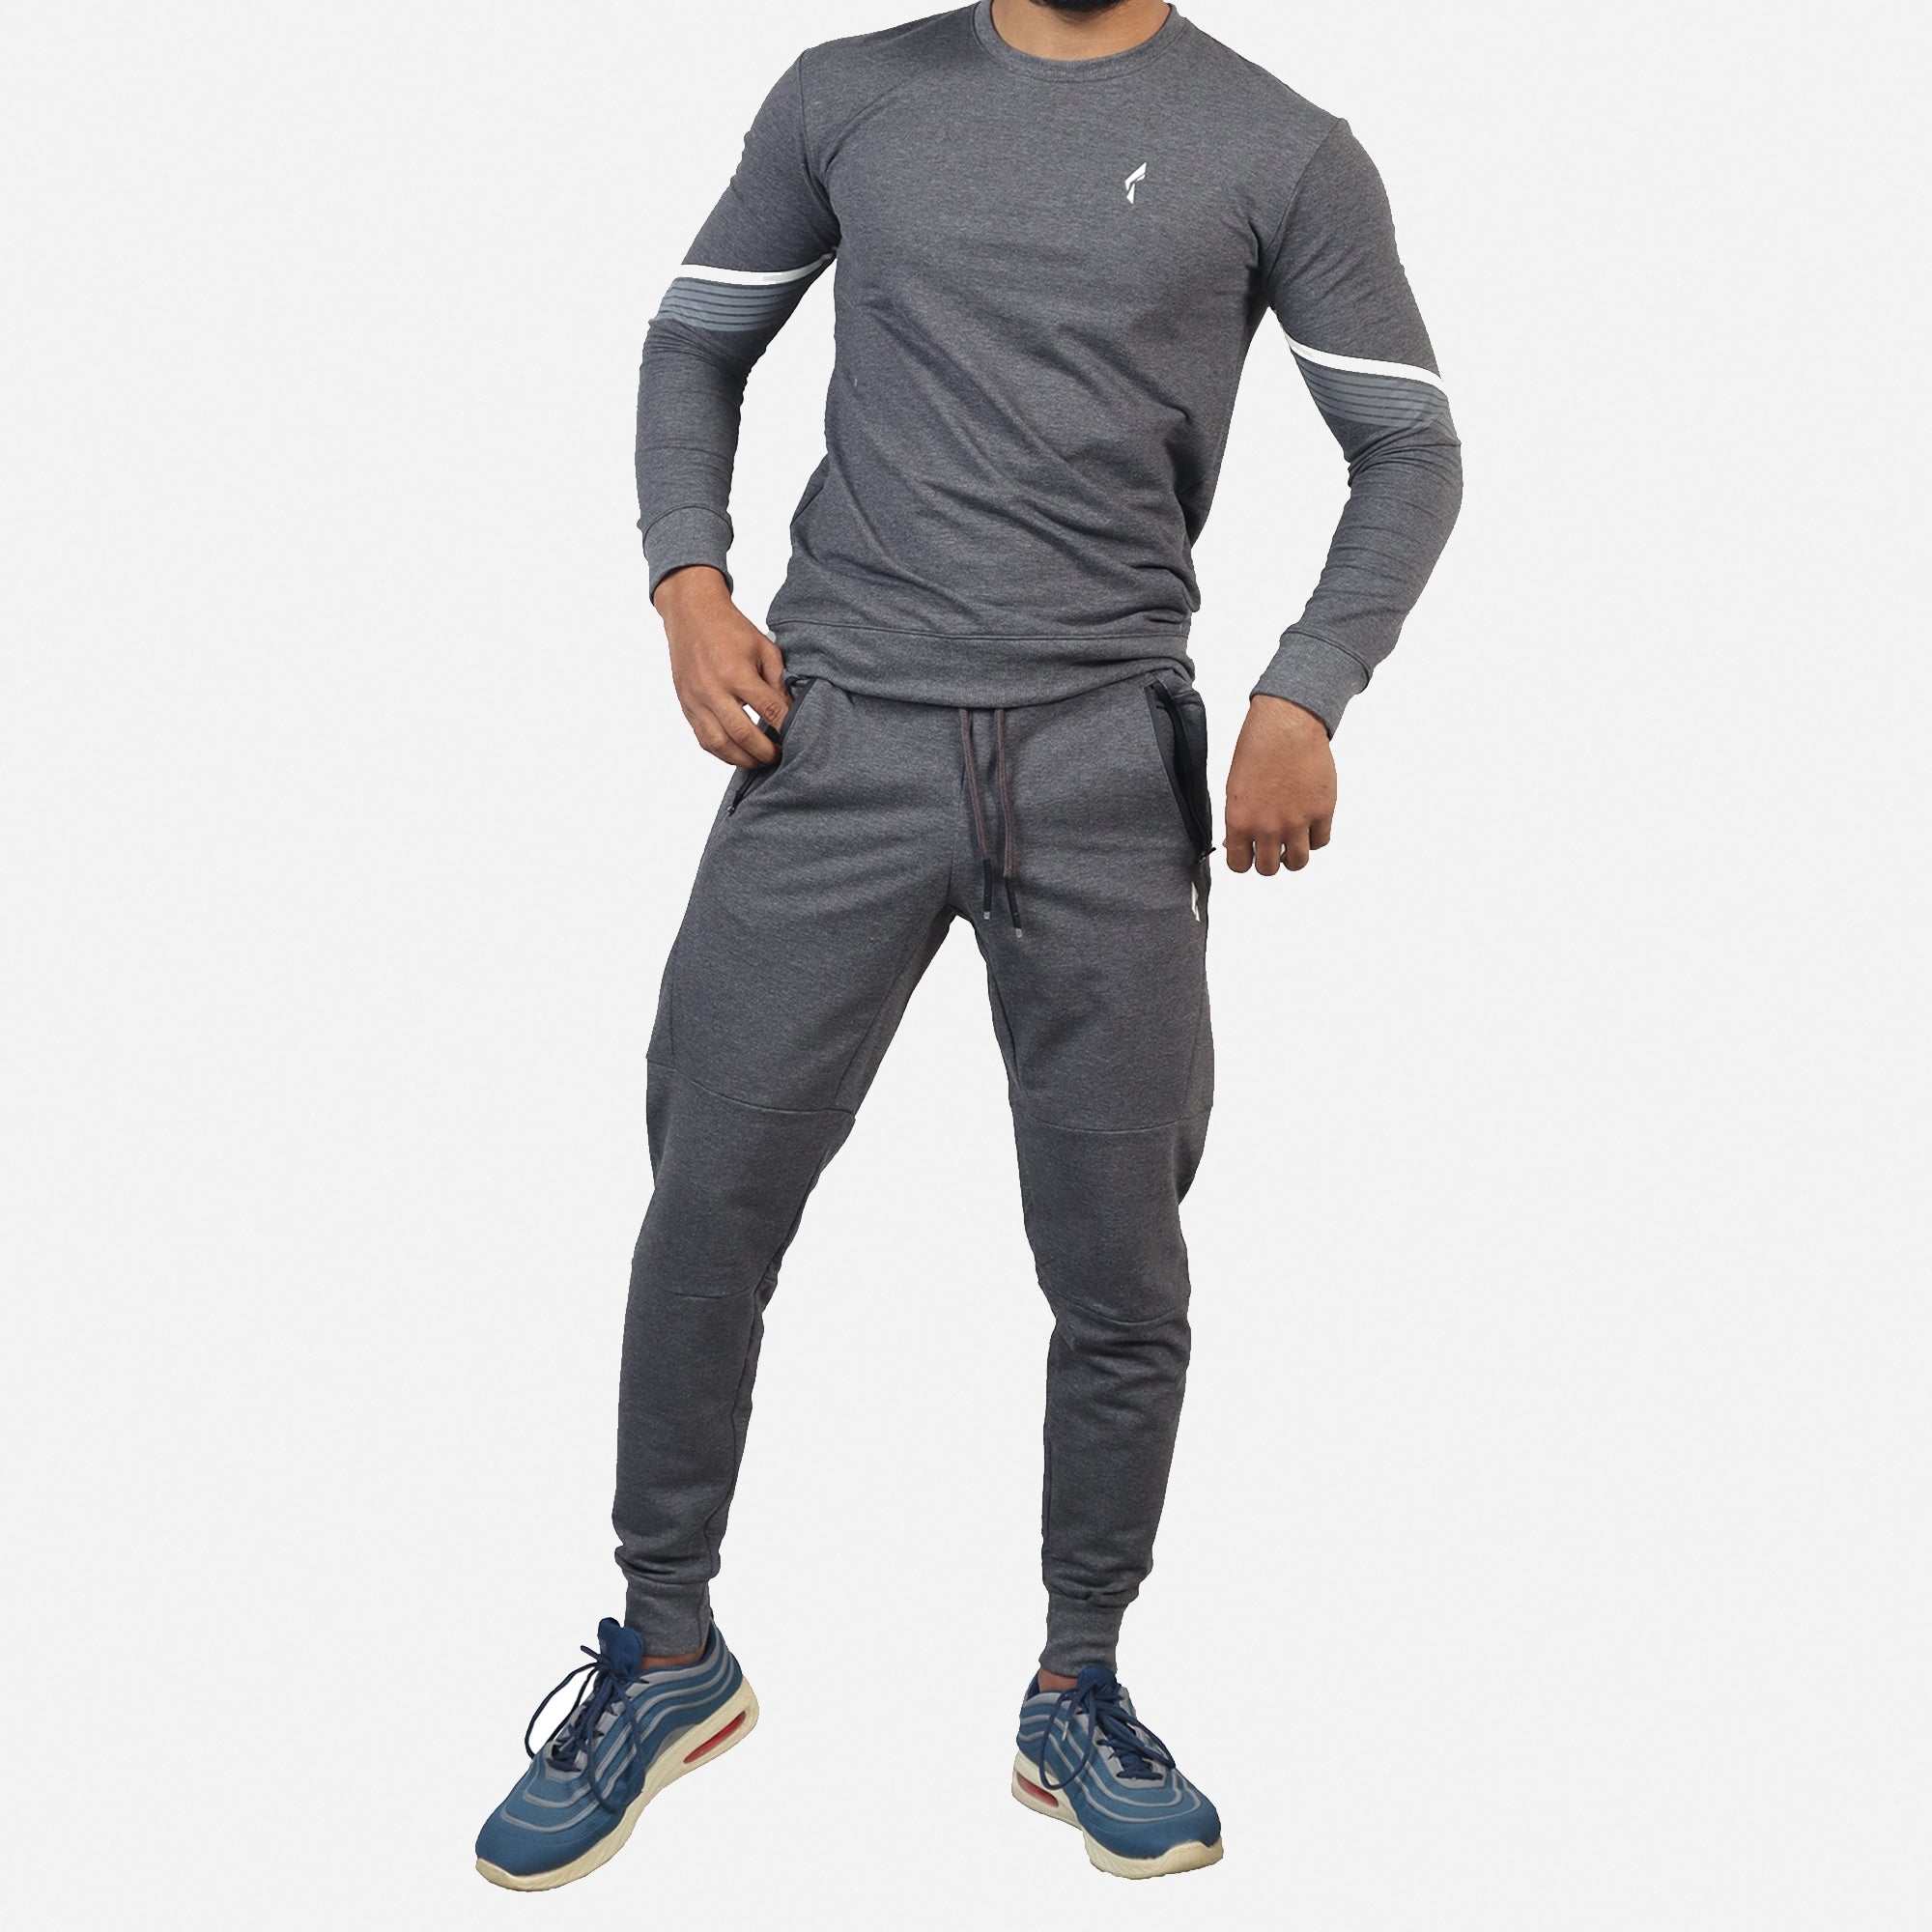 French Terry Tracksuit 2 Piece Sweatsuit Set Athletic Suit - Charcoal